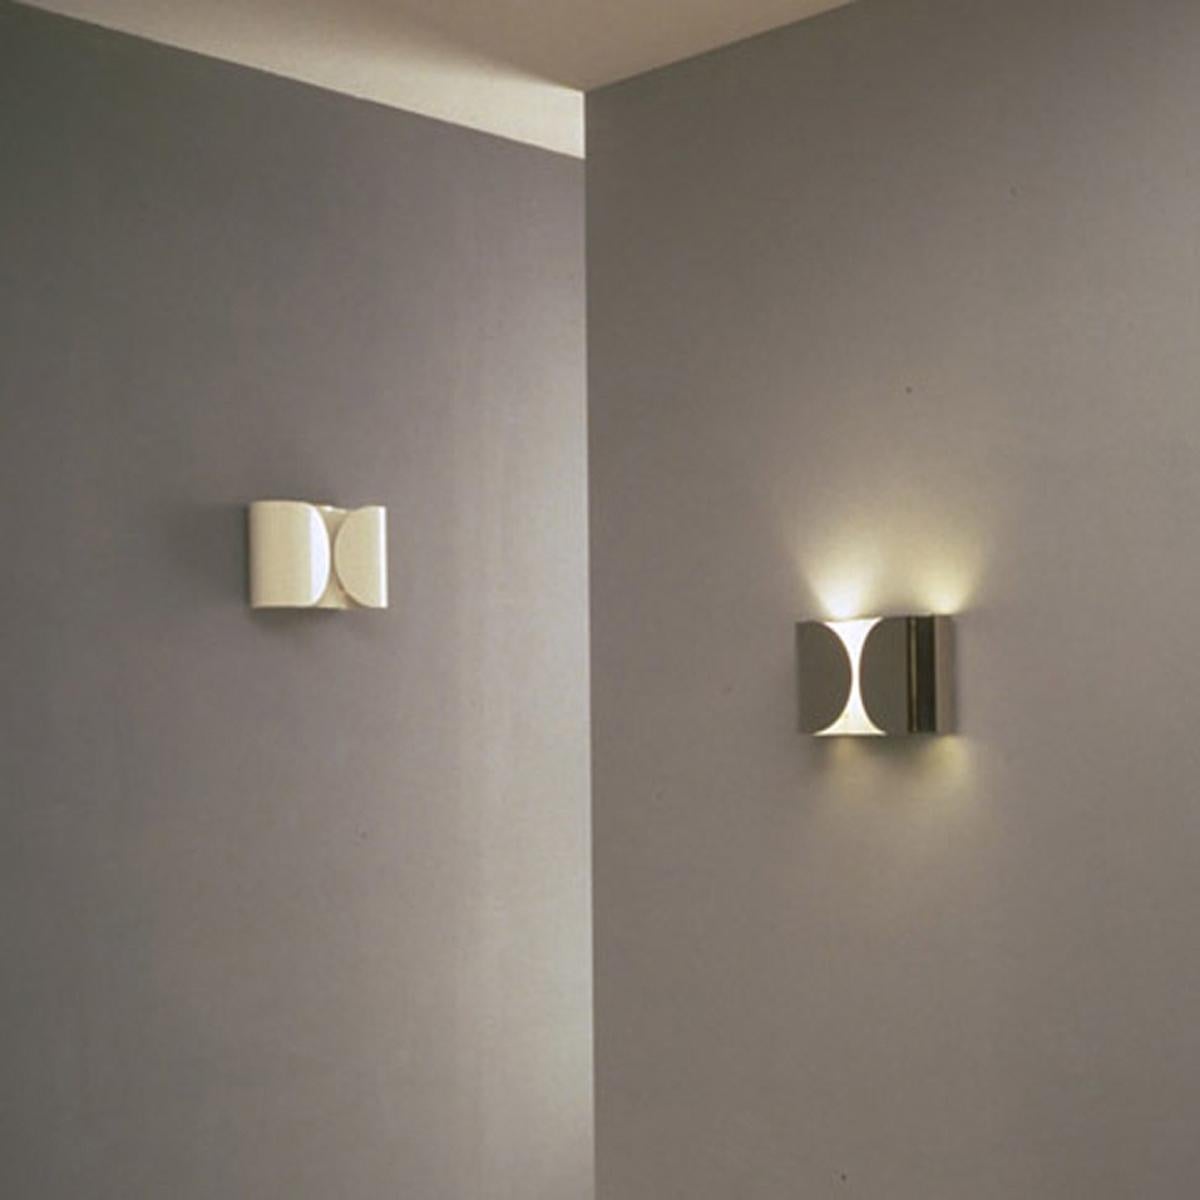 Flos Foglio - Wall Sconce in Black by Tobia Scarpa

Resembling a shirt cuff, the contemporary Foglio wall lamp from design master Tobia Scarpa is a mixture of timeless and contemporary design. The lamp’s body is formed by power-painted pressed